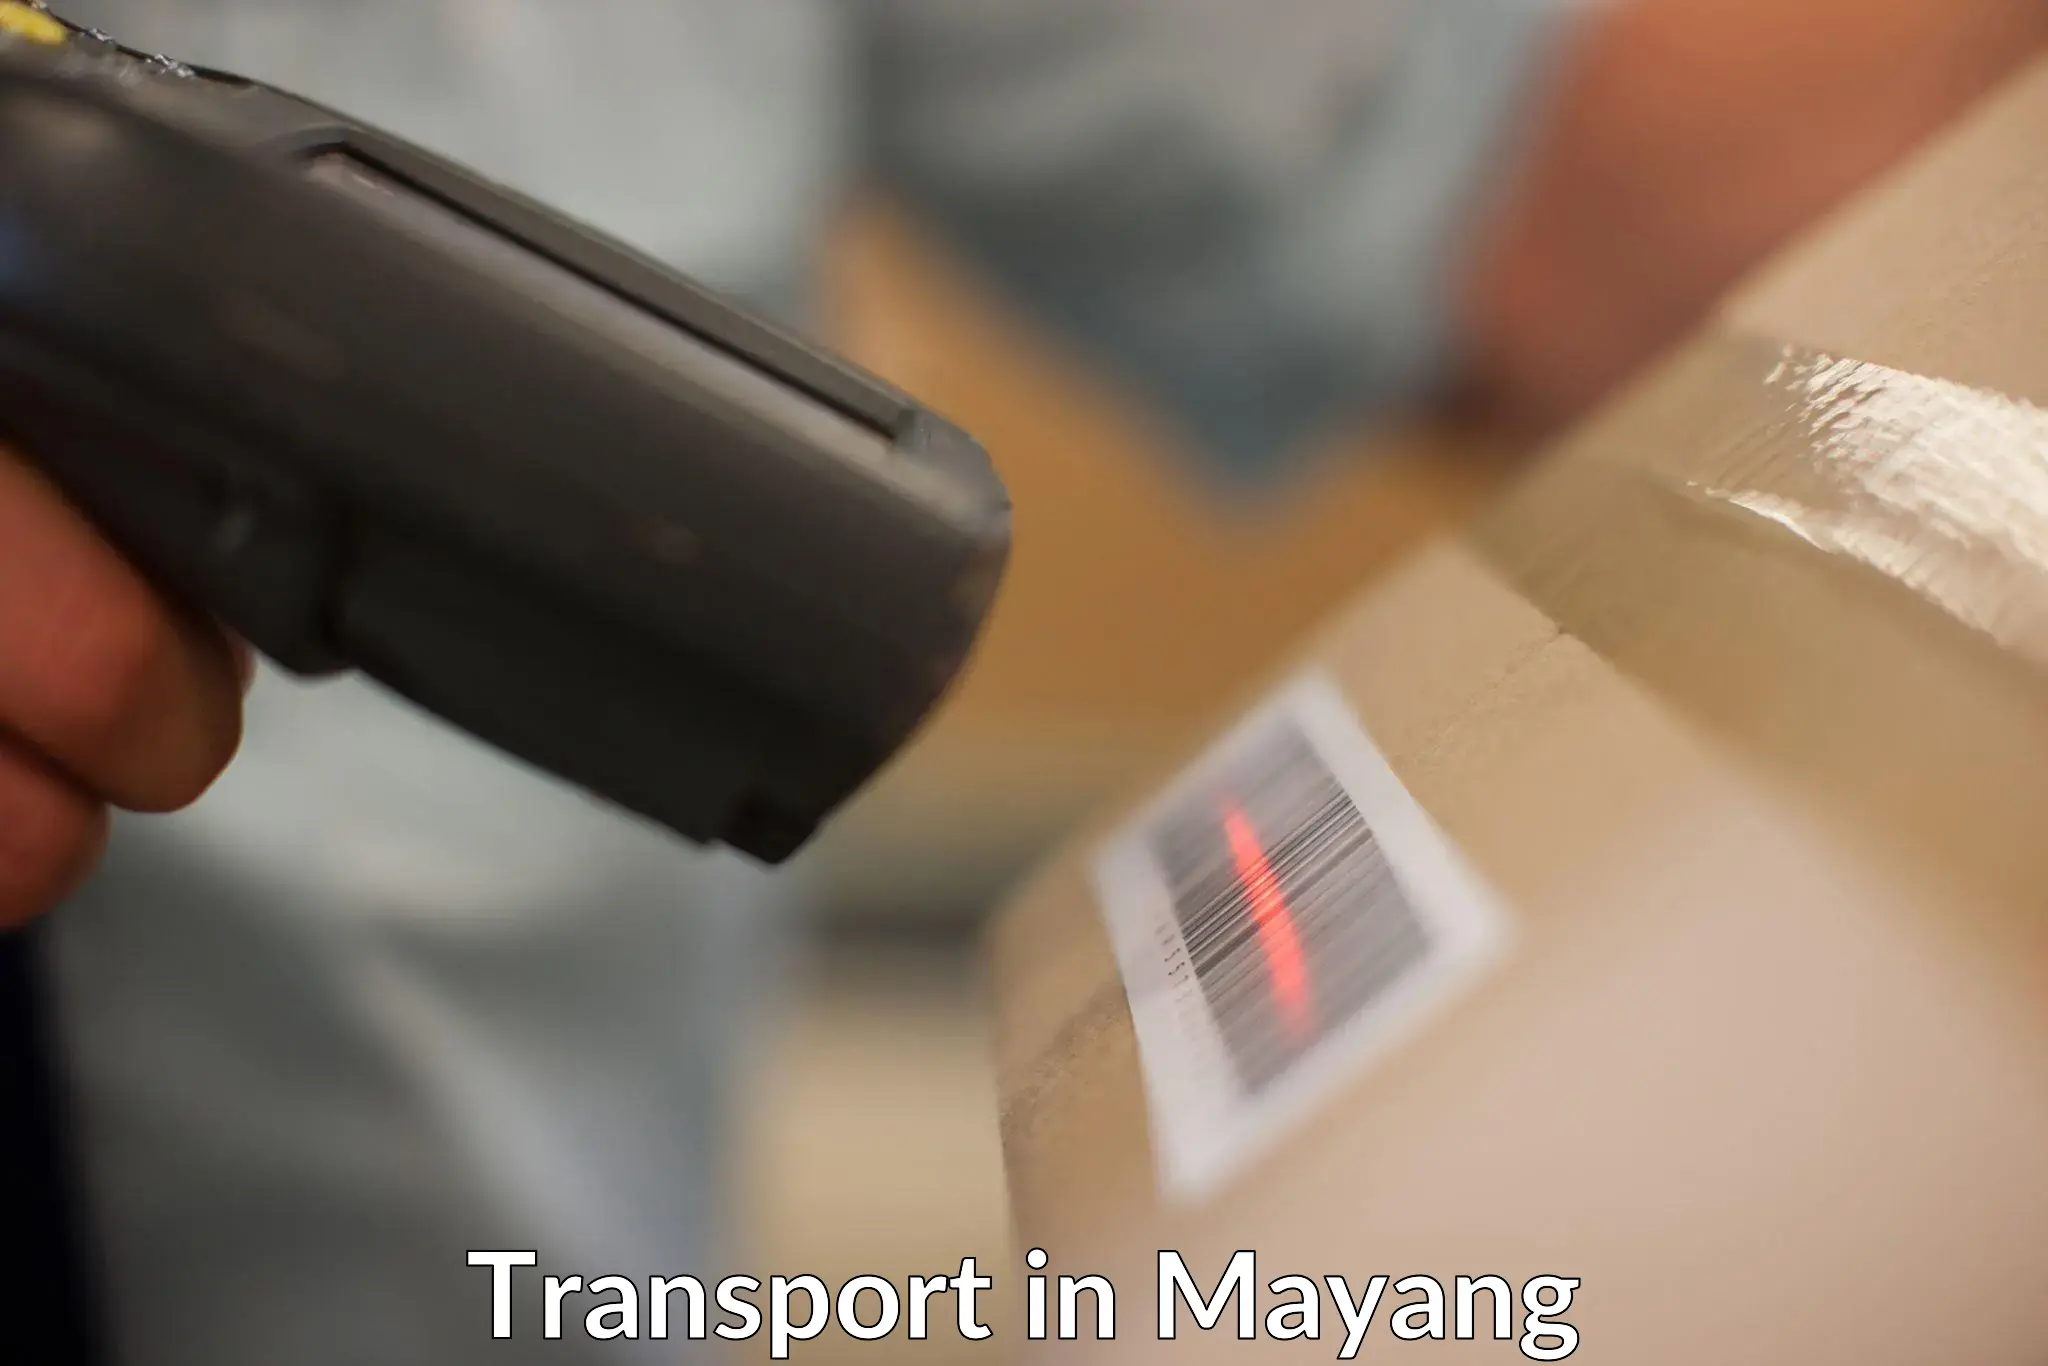 Transport in sharing in Mayang